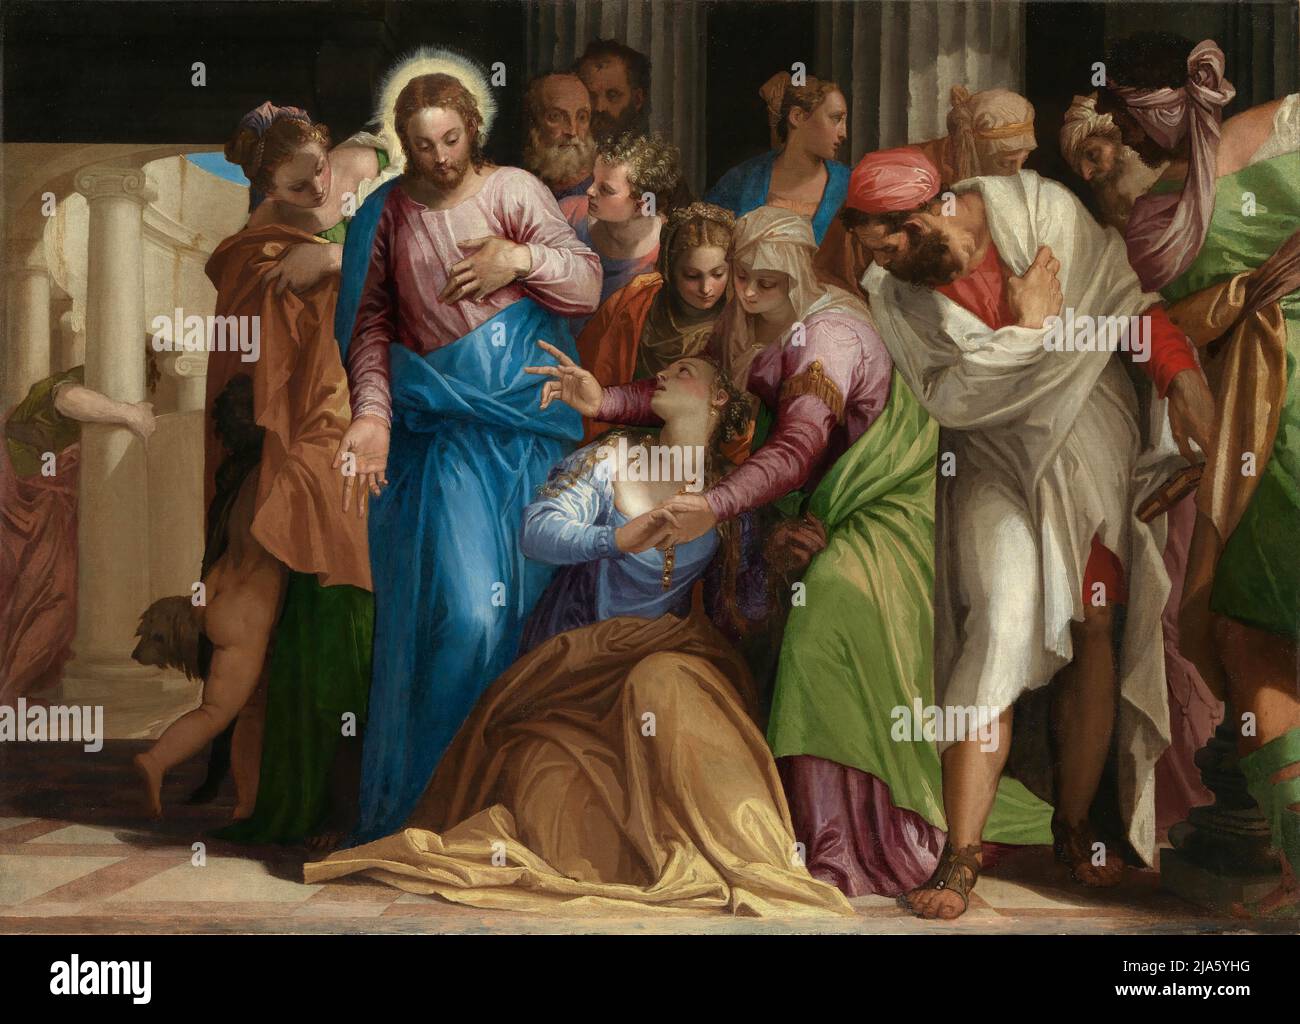 The Conversion of Mary Magdalene by Paolo Veronese. According to Gospel of Luke Jesus exorcized 'seven demons' from Mary Magdalene. Stock Photo